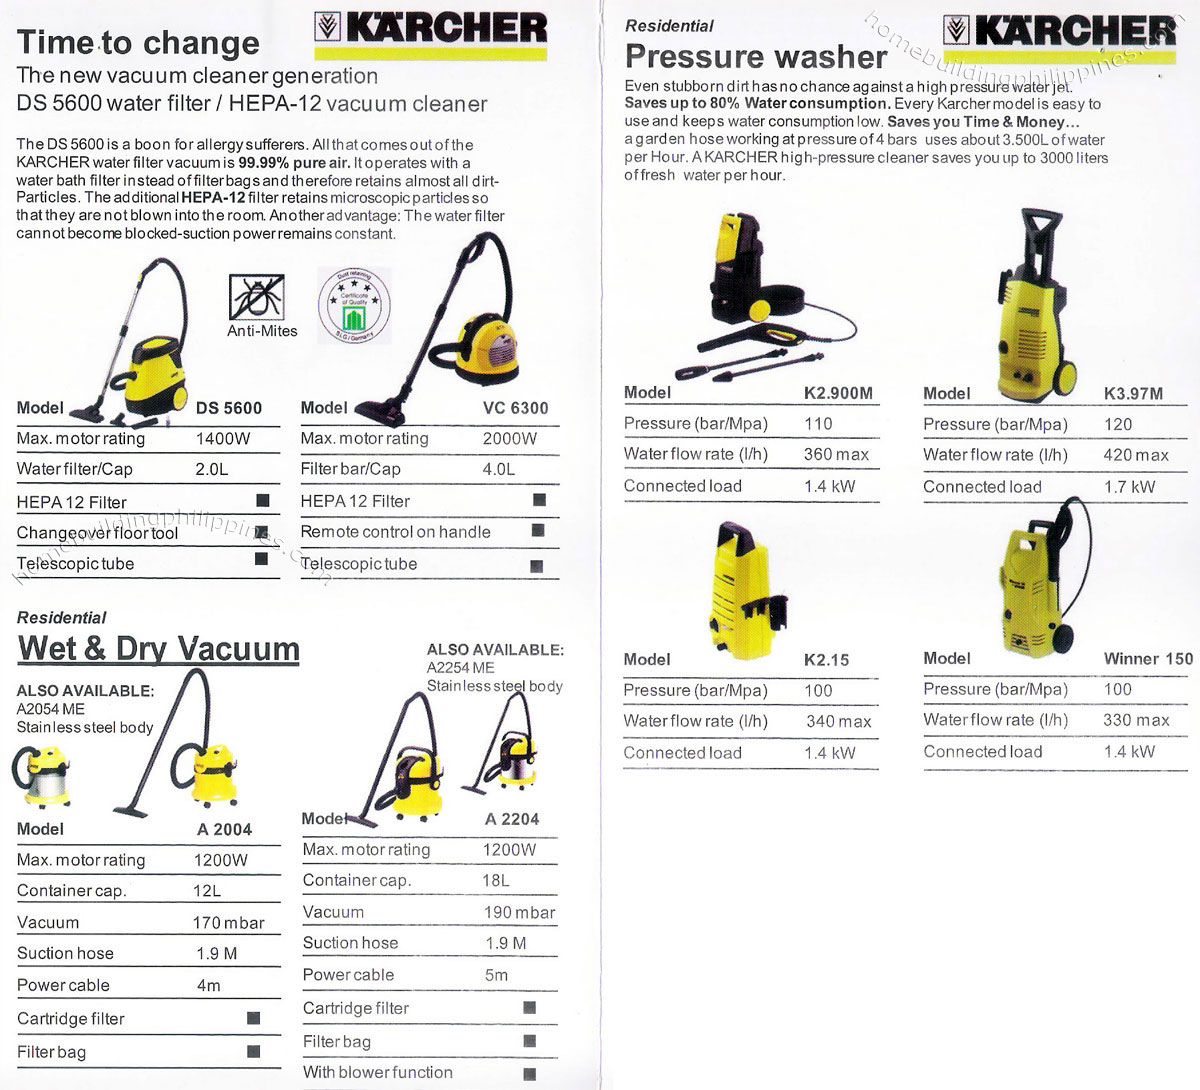 Karcher Residential Vacuum Cleaner Wet Dry Pressure Washer